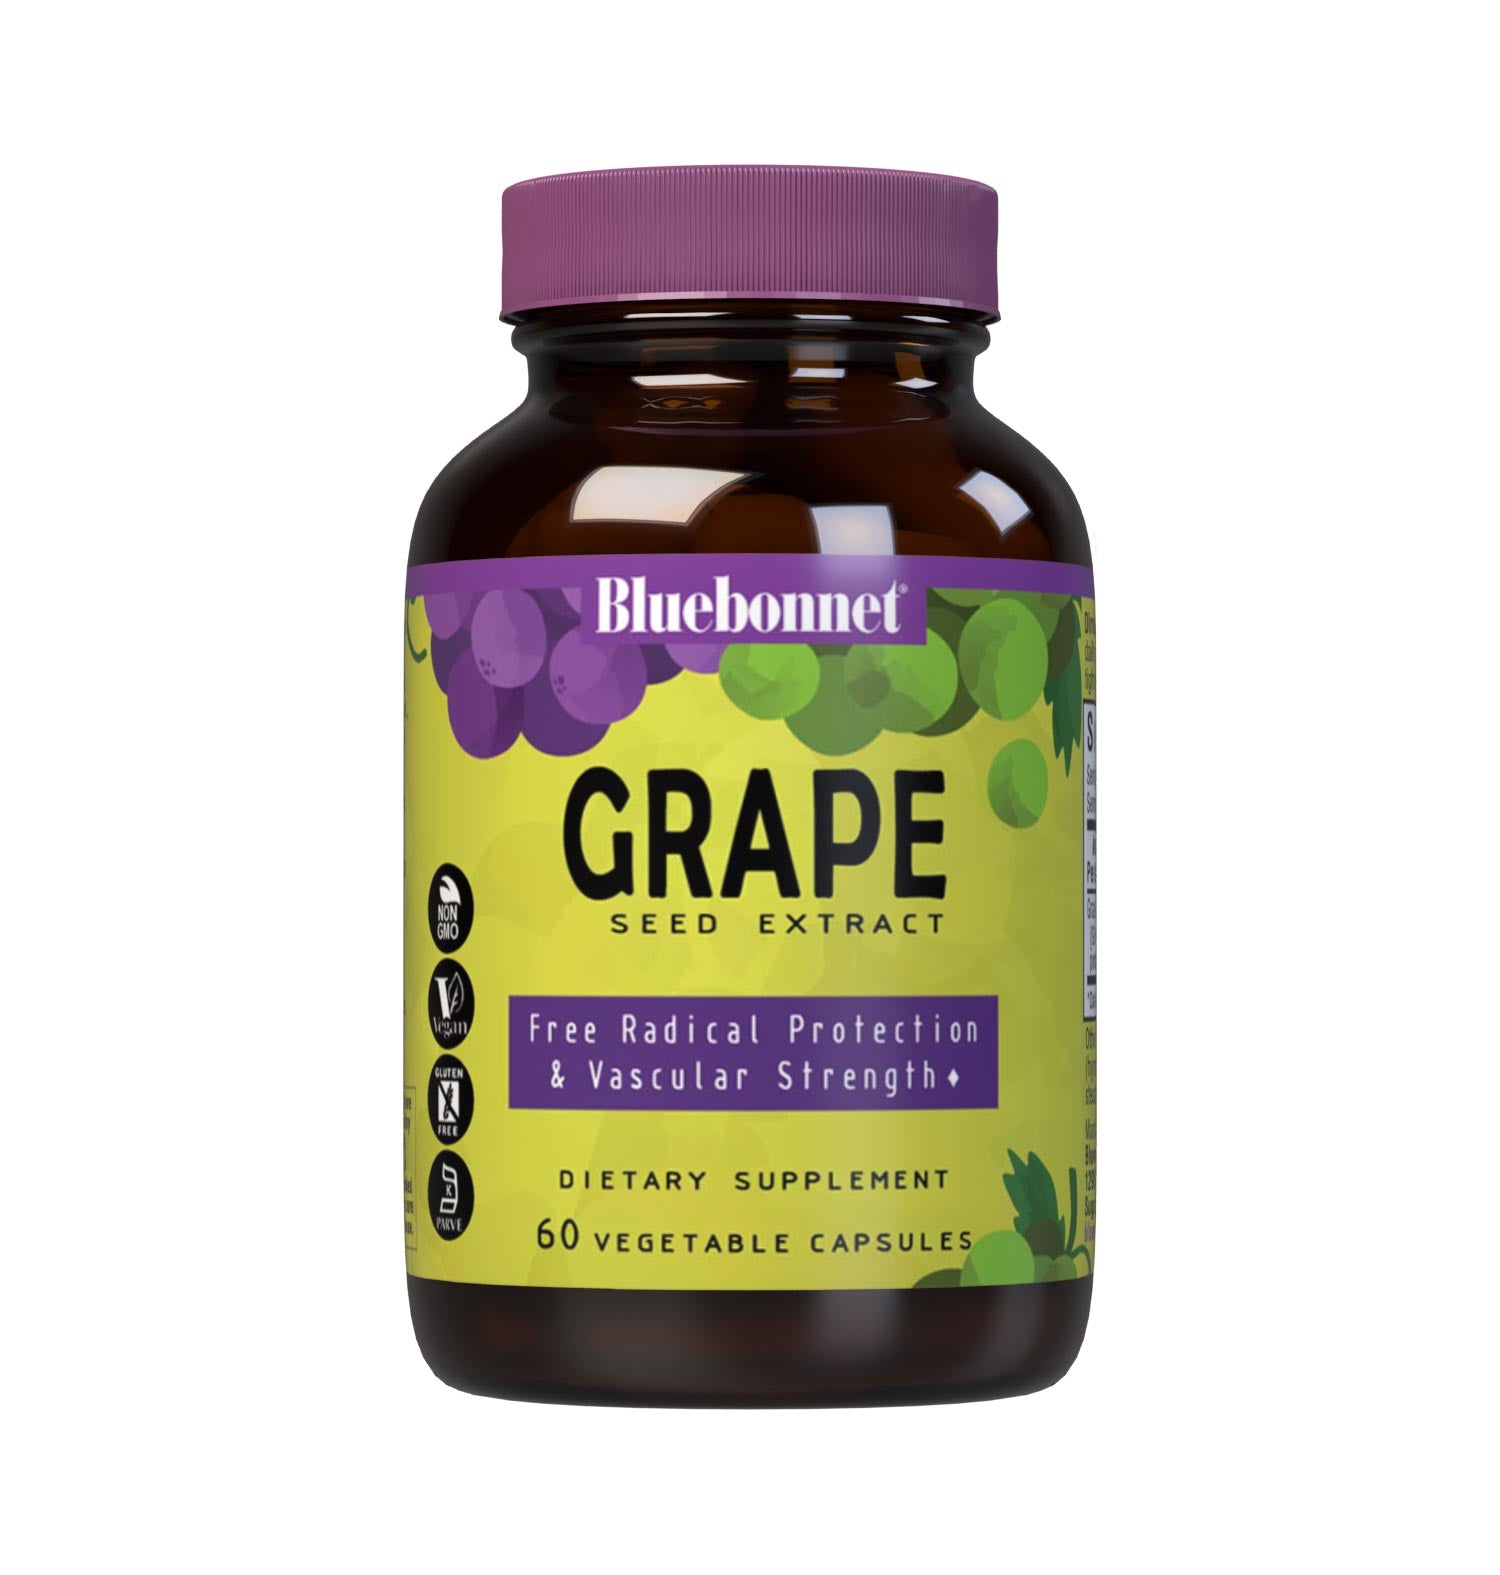 Bluebonnet’s Super Fruit Grape Seed Extract 60 Vegetable Capsules are derived from Champagne grape seeds imported from France. These special grape seeds are turned into an extract known as Leucoselect supplying 100 mg per serving of grape seed extract standardized to 95% total polyphenols including oligomeric proanthocyanidins, monomeric polyphenols and flavonoids. These potent active constituents help support circulatory health and protect against the damaging effects of free radicals. #size_60 count